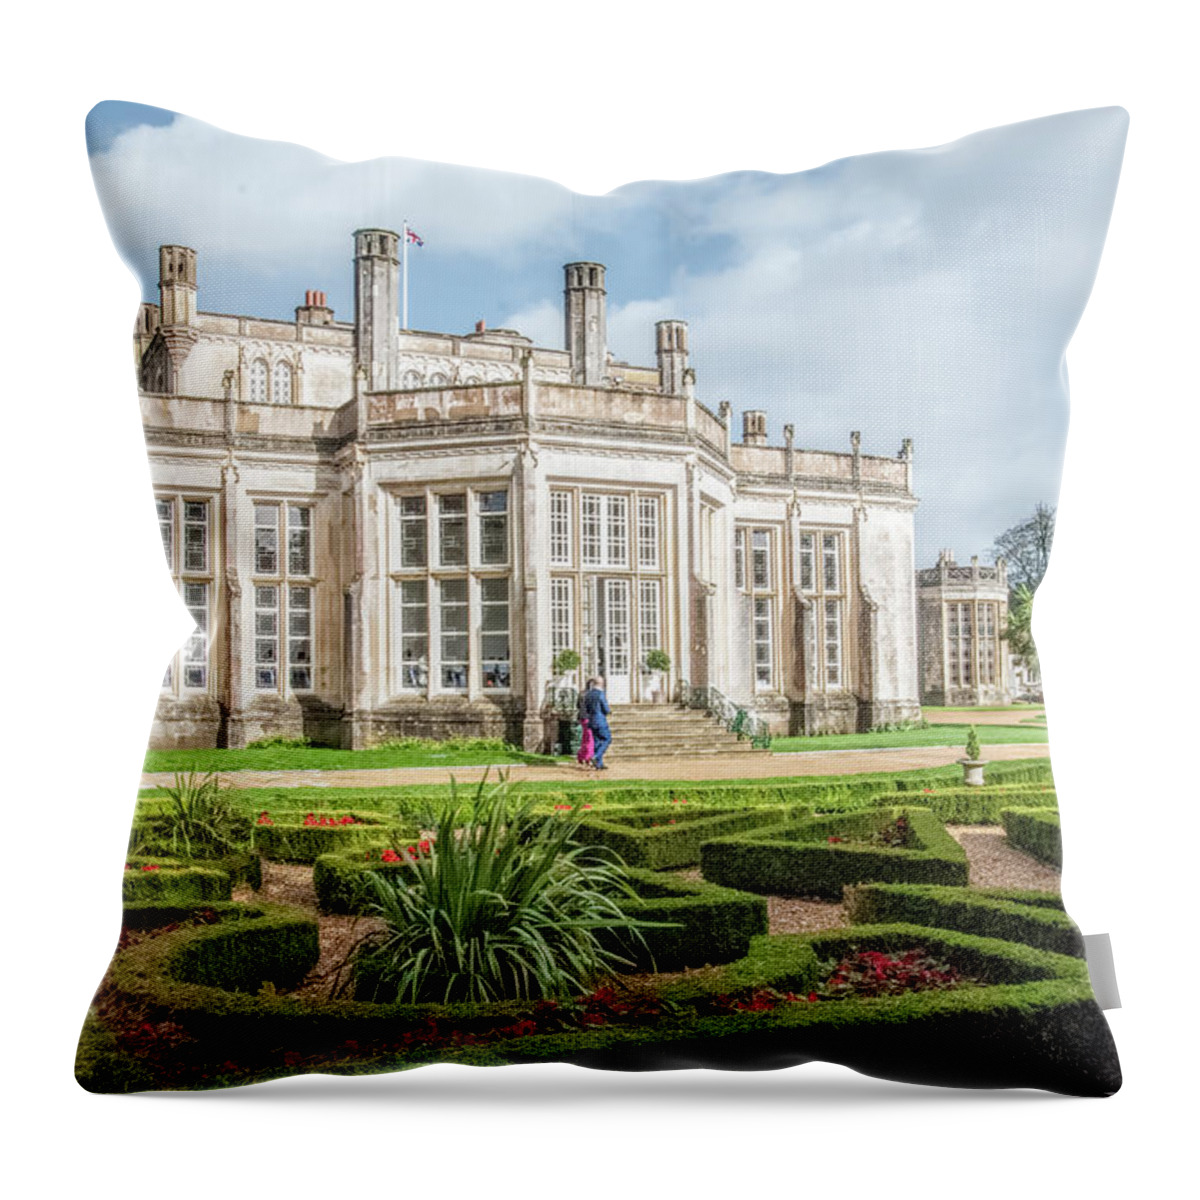 Highcliffe Castle And Gardens Throw Pillow featuring the photograph Highcliffe Castle and Gardens by Phyllis Taylor